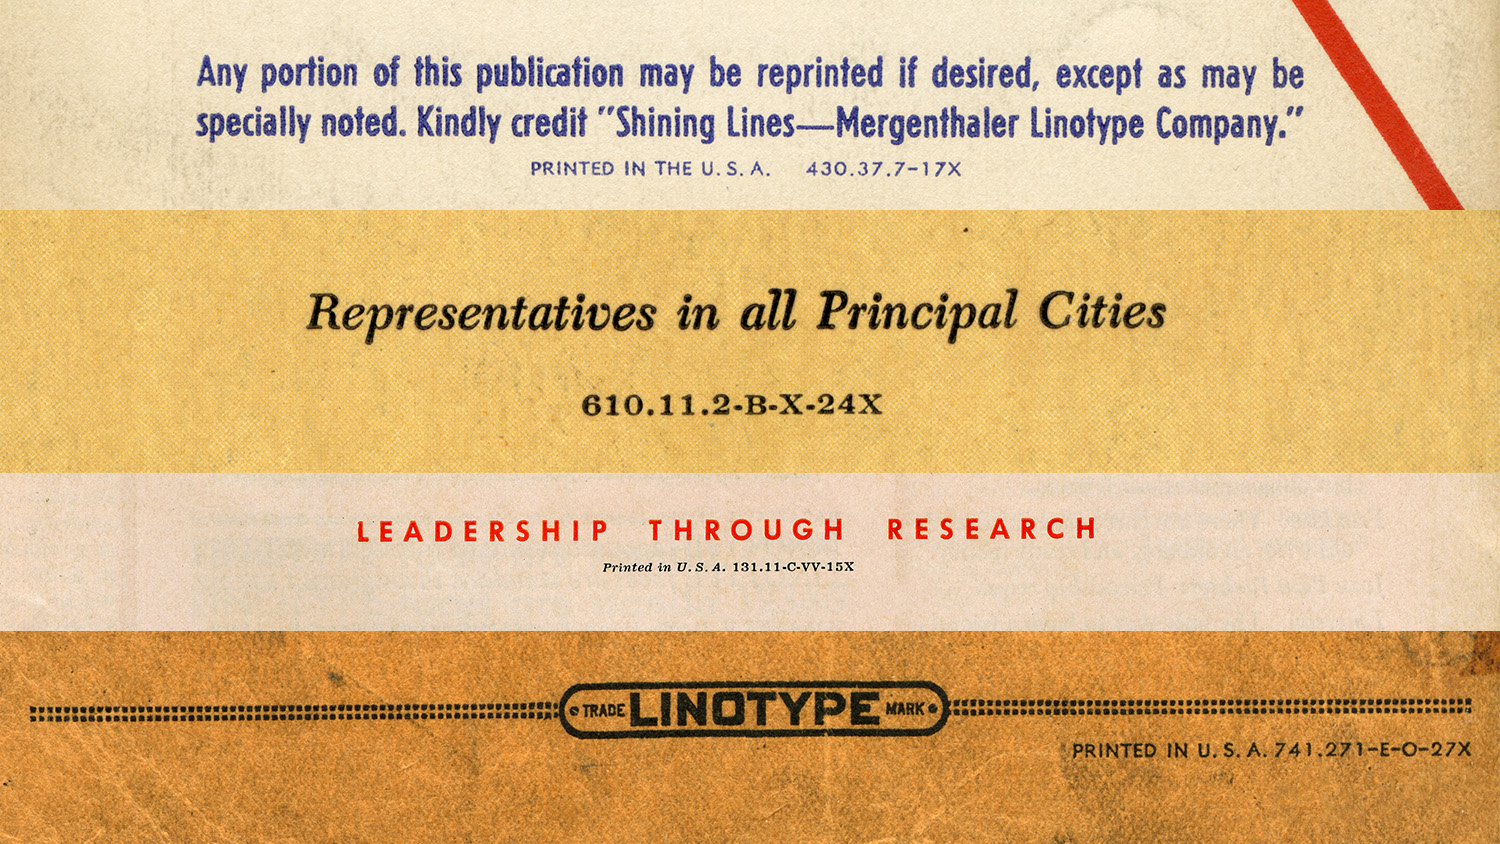 The bottom document has publication code 741.271-E-O-27X which was printed May 1936 (the other three are labeled above)